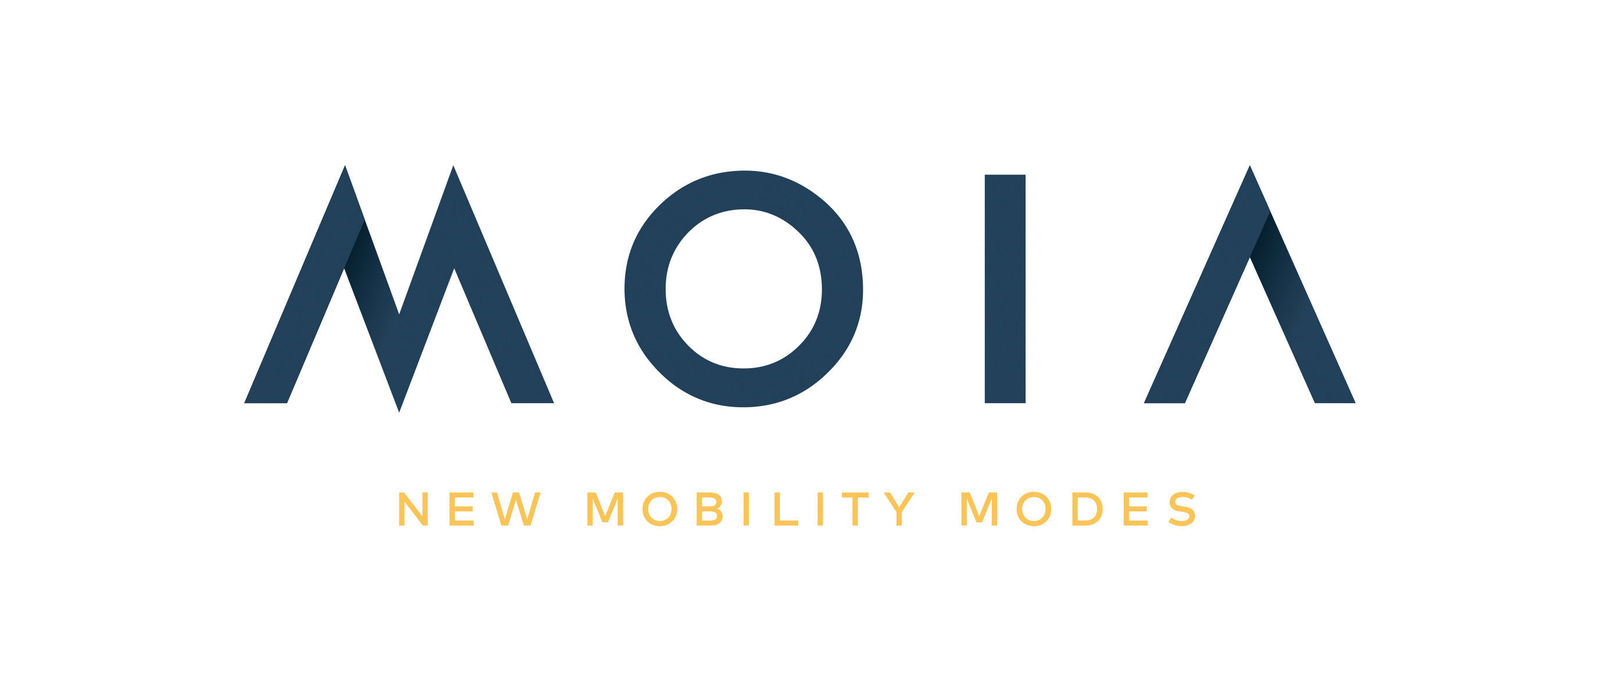 MOIA – the Volkswagen Group's new mobility services company